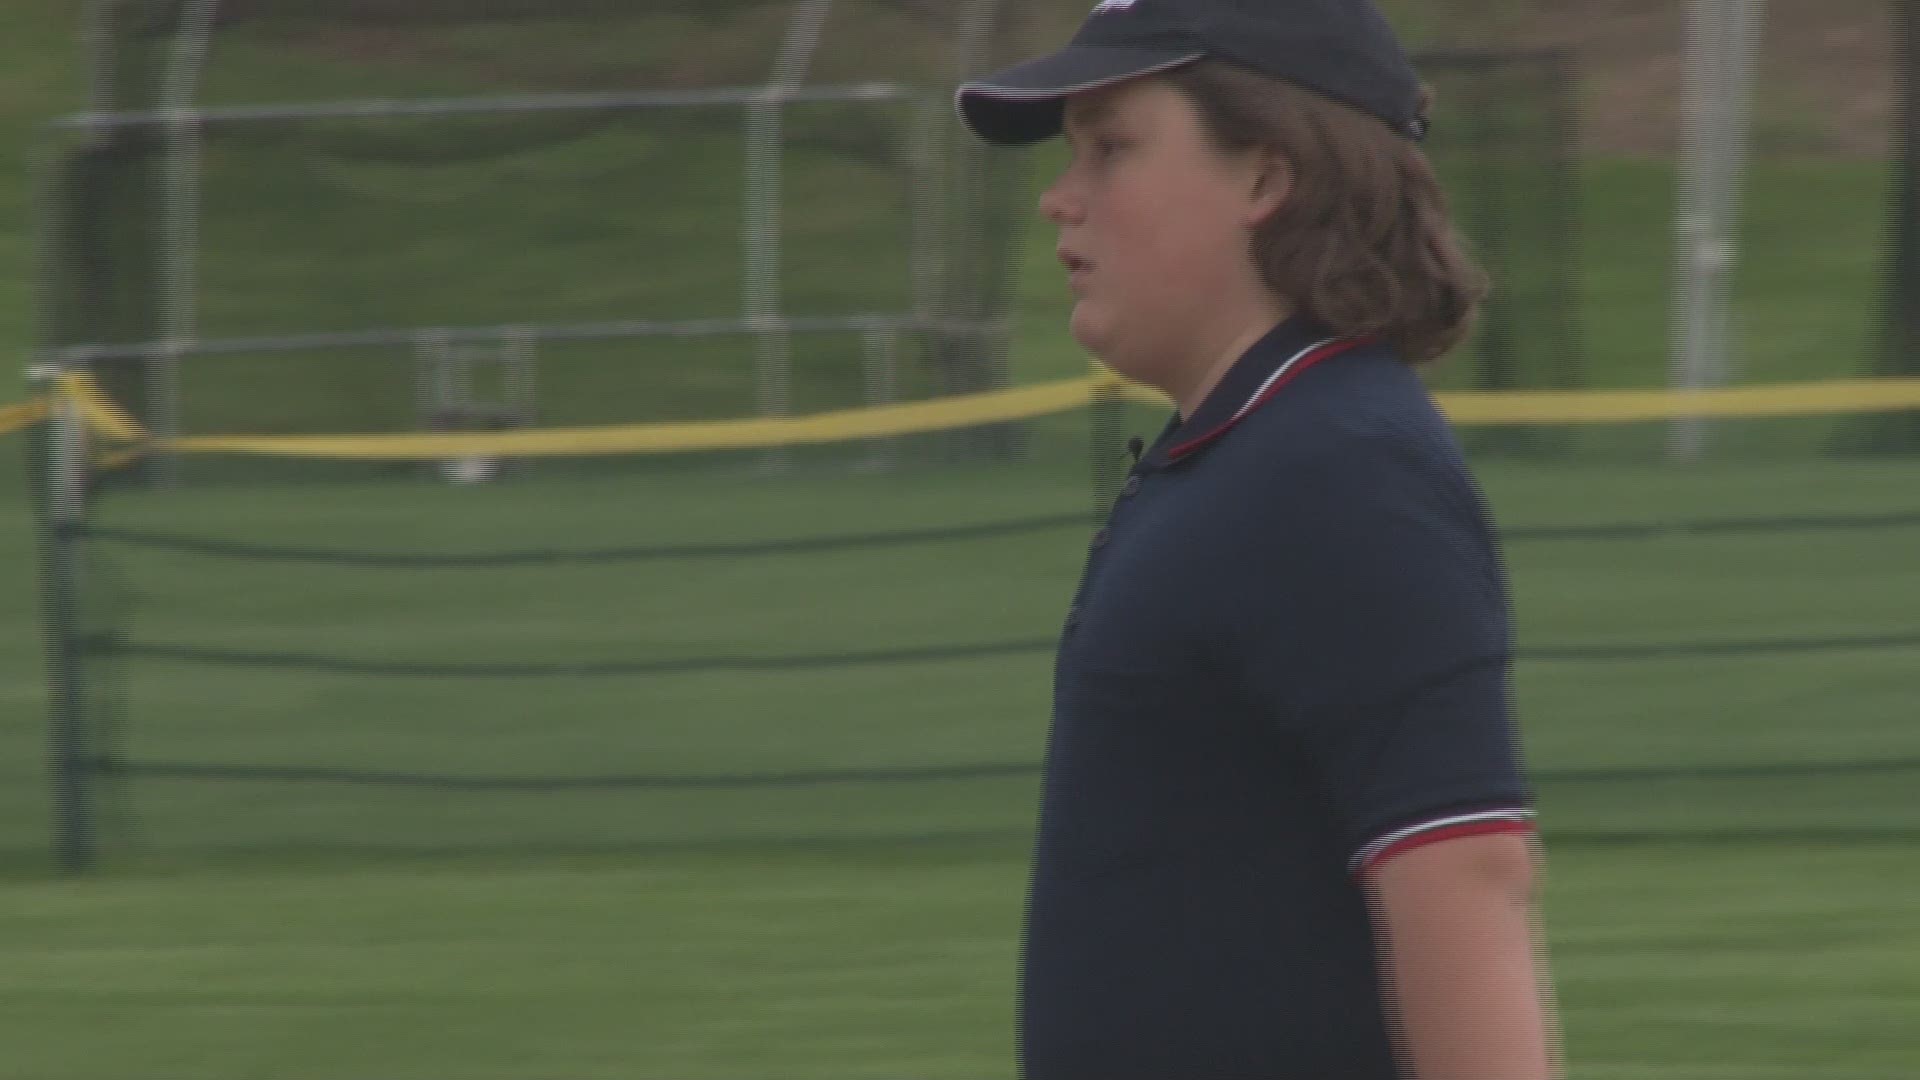 Andrew Woody Jr. was disappointed when he didn't make the baseball team at Westbrook Middle School, so he found a different way to take part as an umpire.